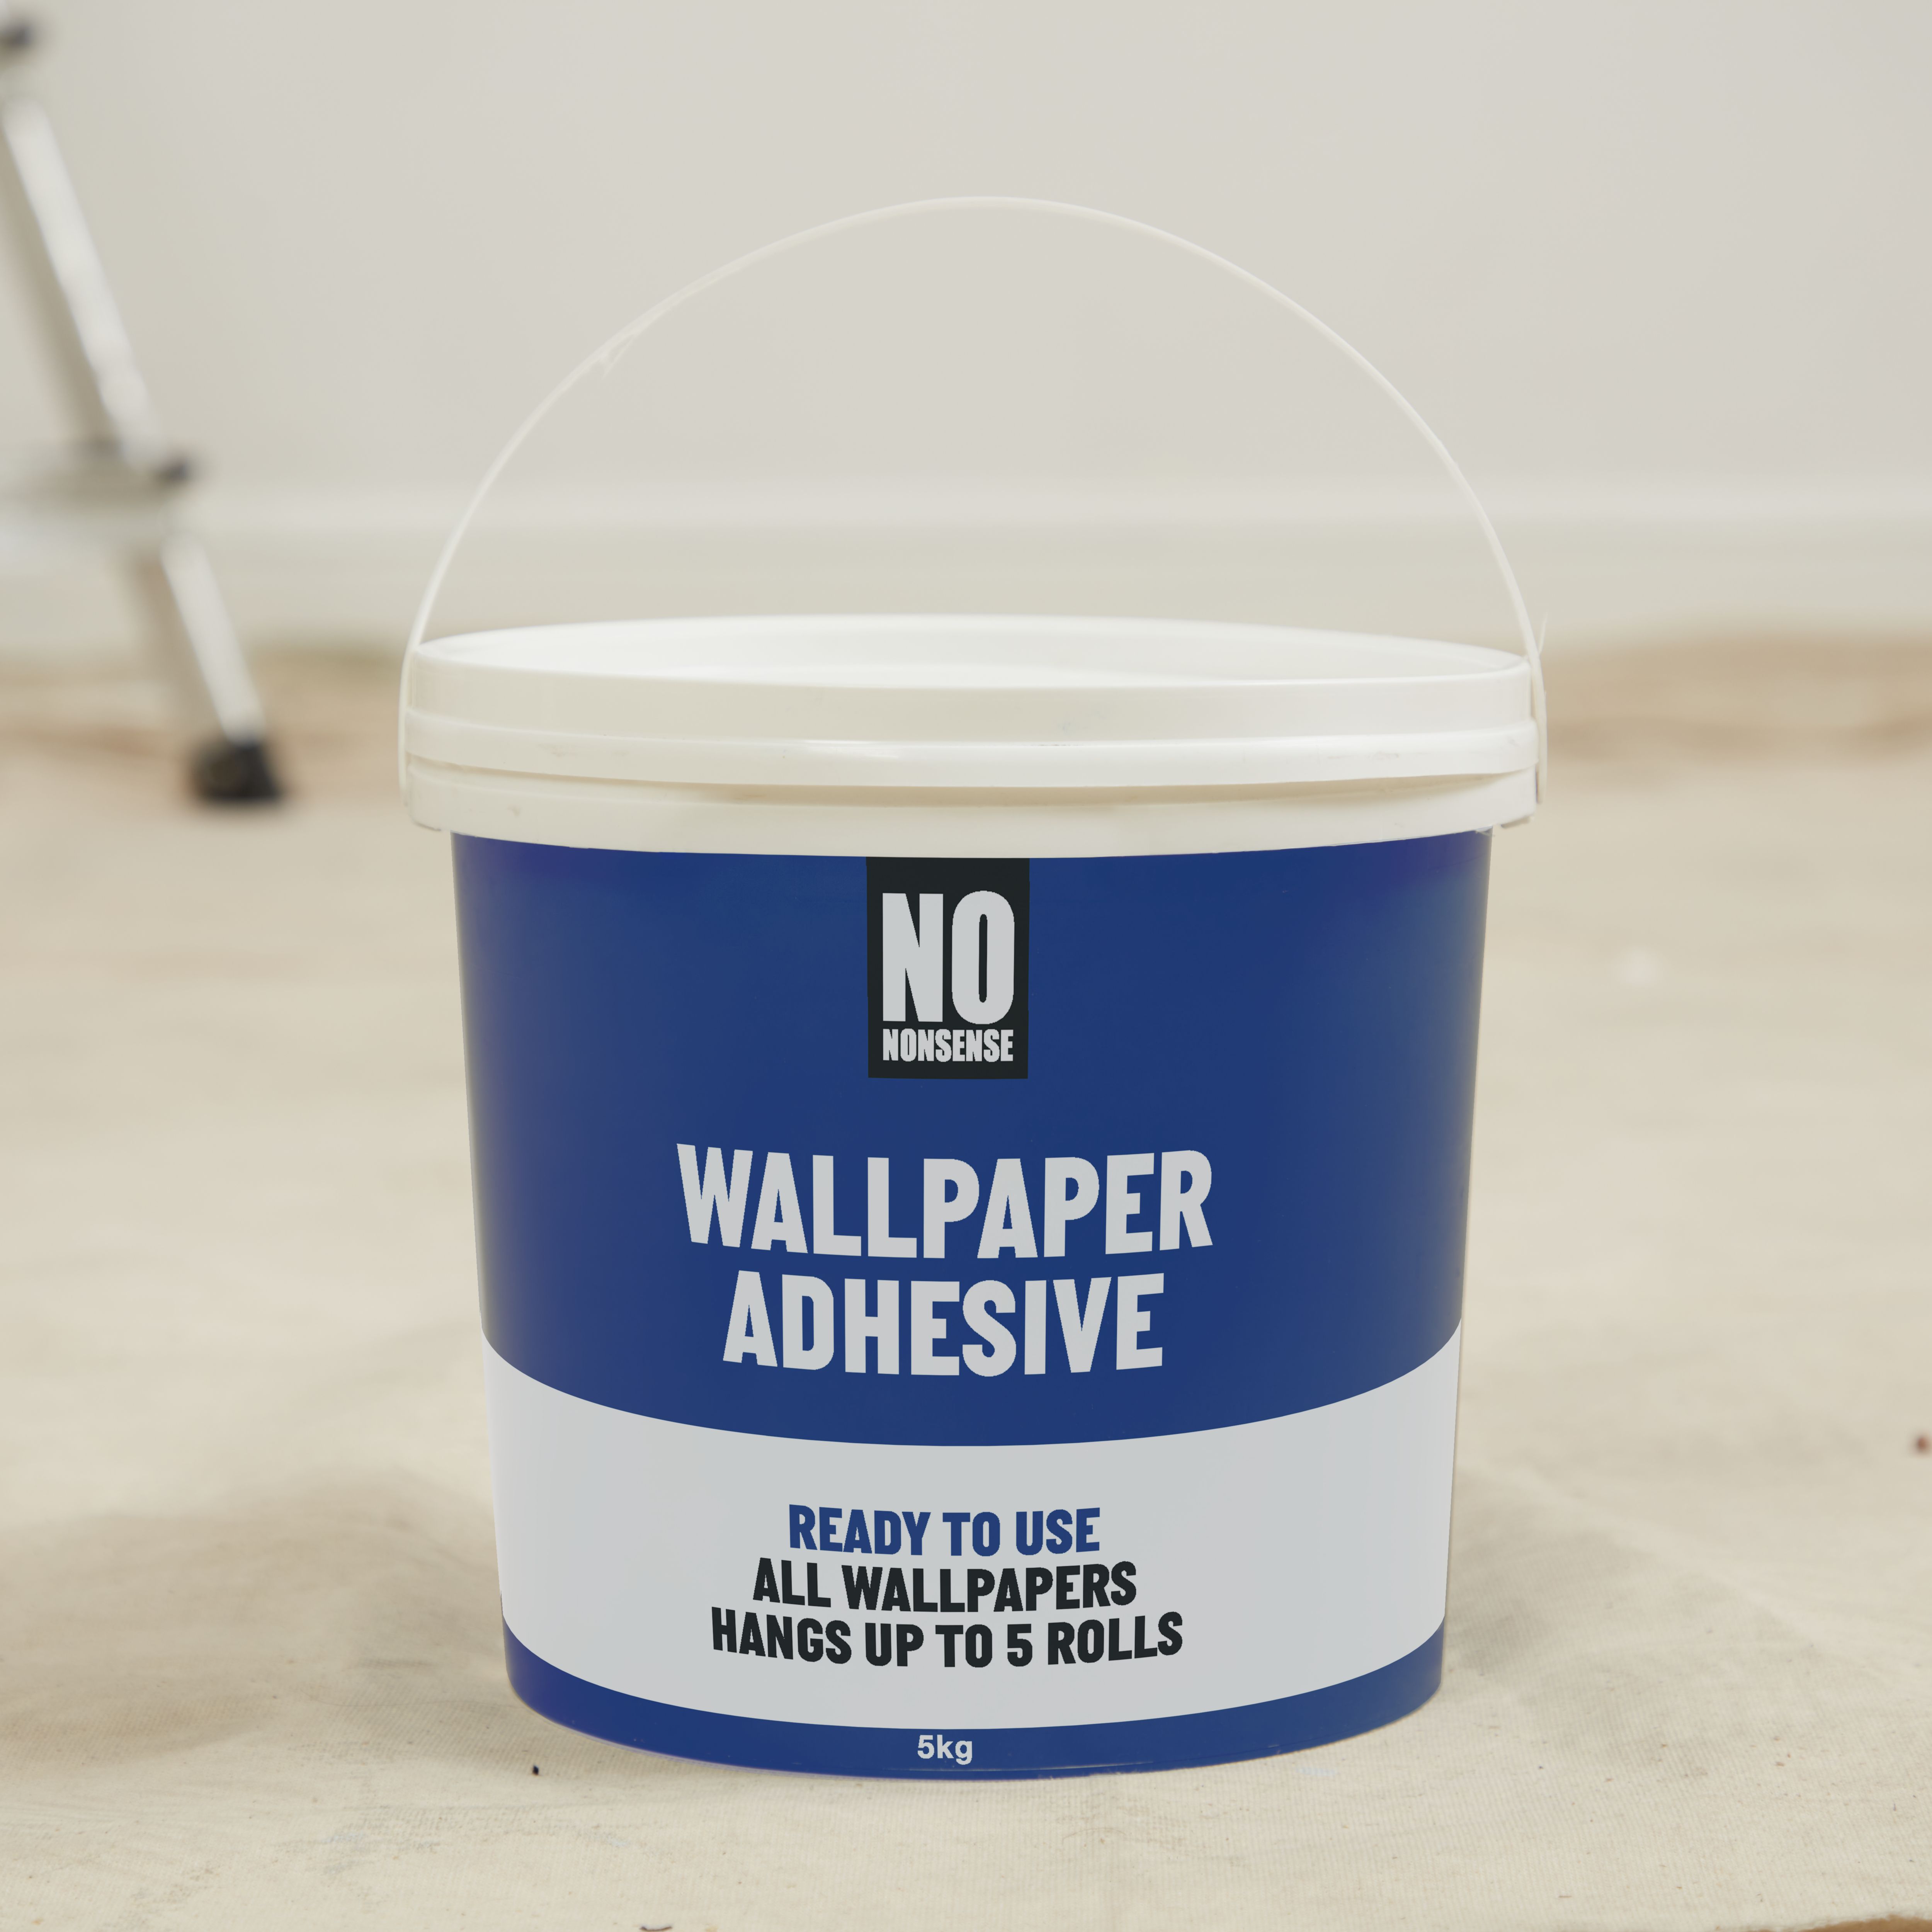 Solvite All purpose Ready mixed Wallpaper Adhesive 9kg - 10 rolls